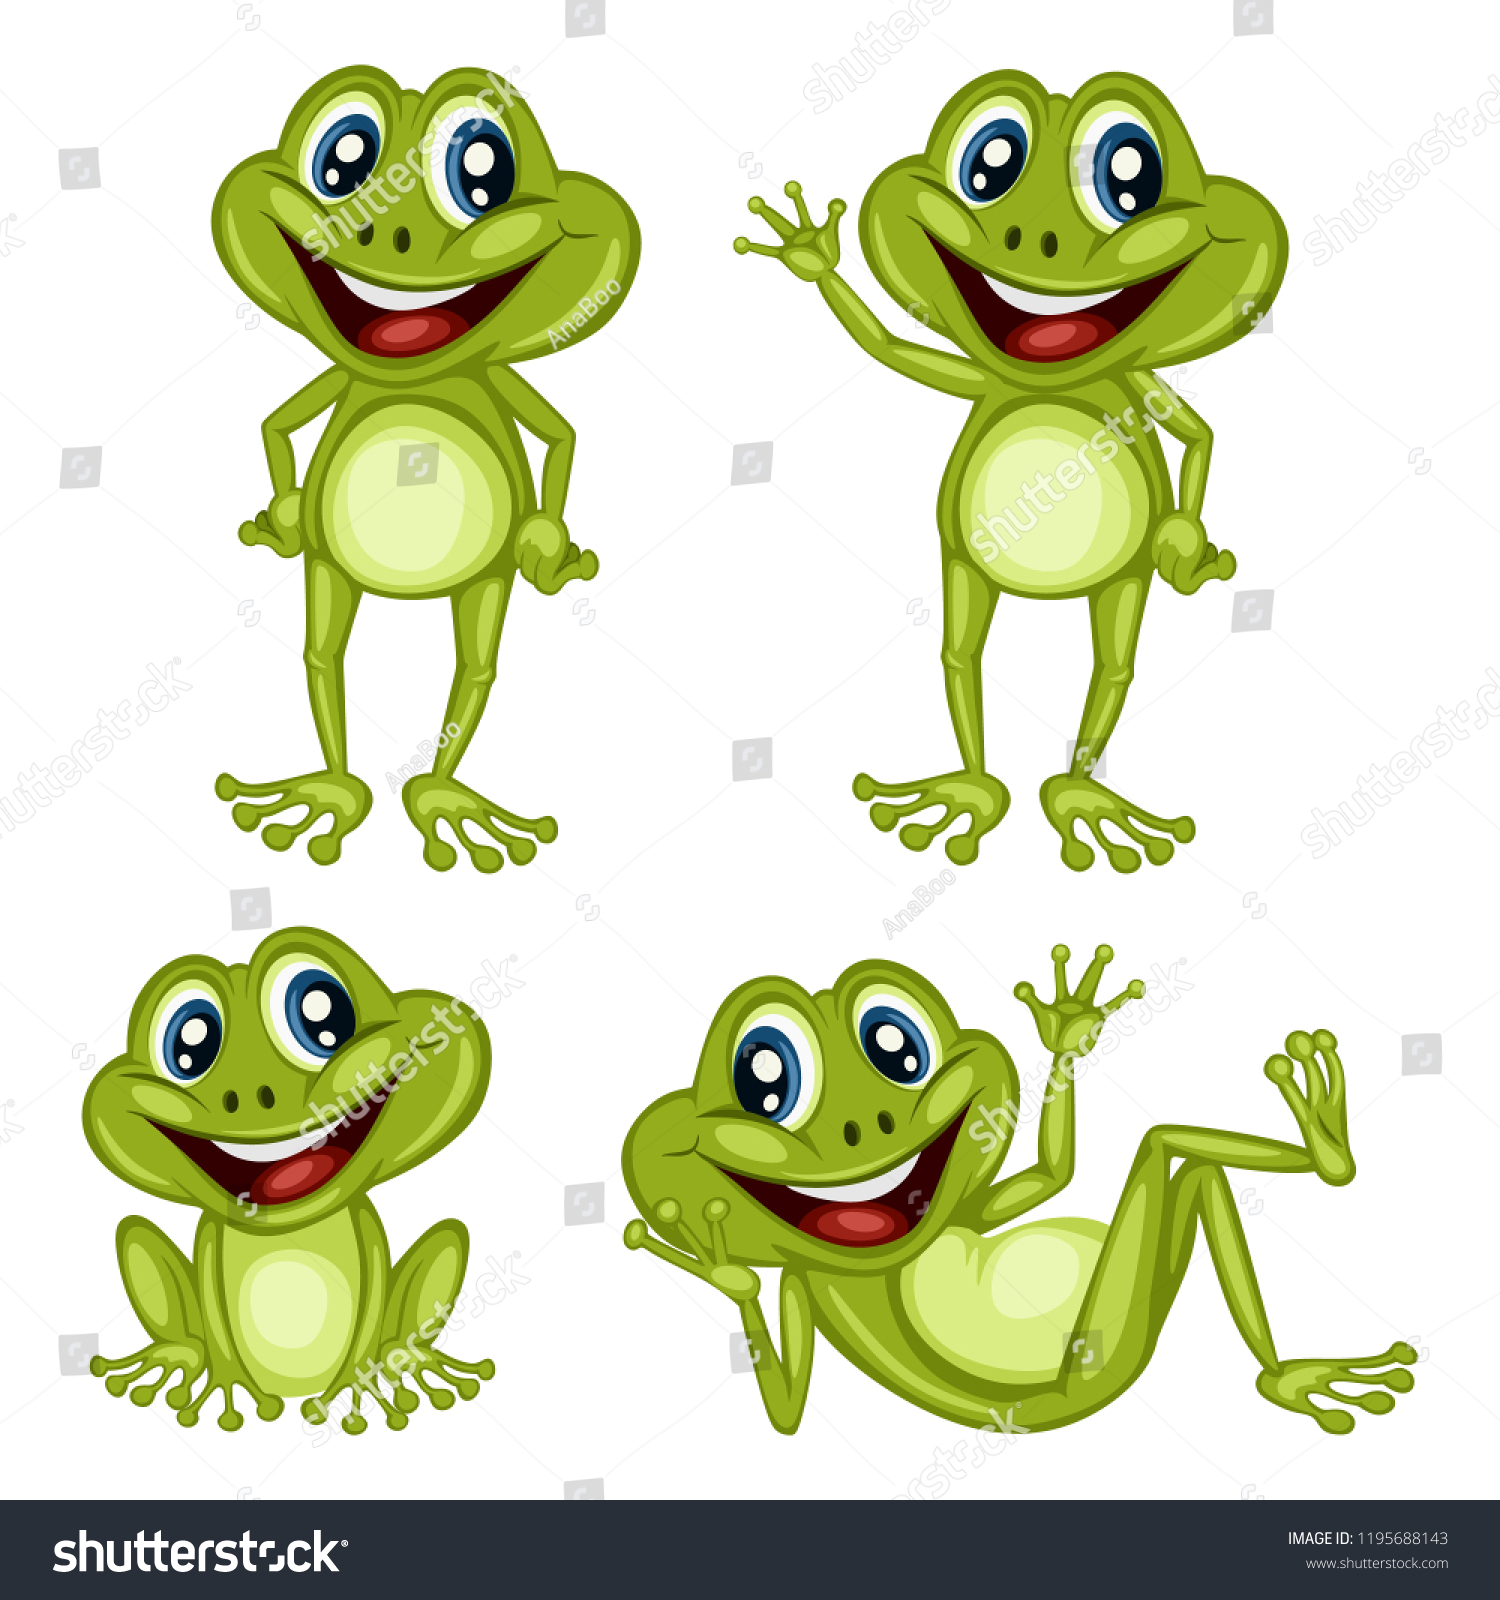 Vector Illustration of a Happy Frog Set. Cute Cartoon Frogs in Different Poses Isolated on a White Background. Happy Animals Set. Frog Laying, Cheering, Waving, Sitting #1195688143